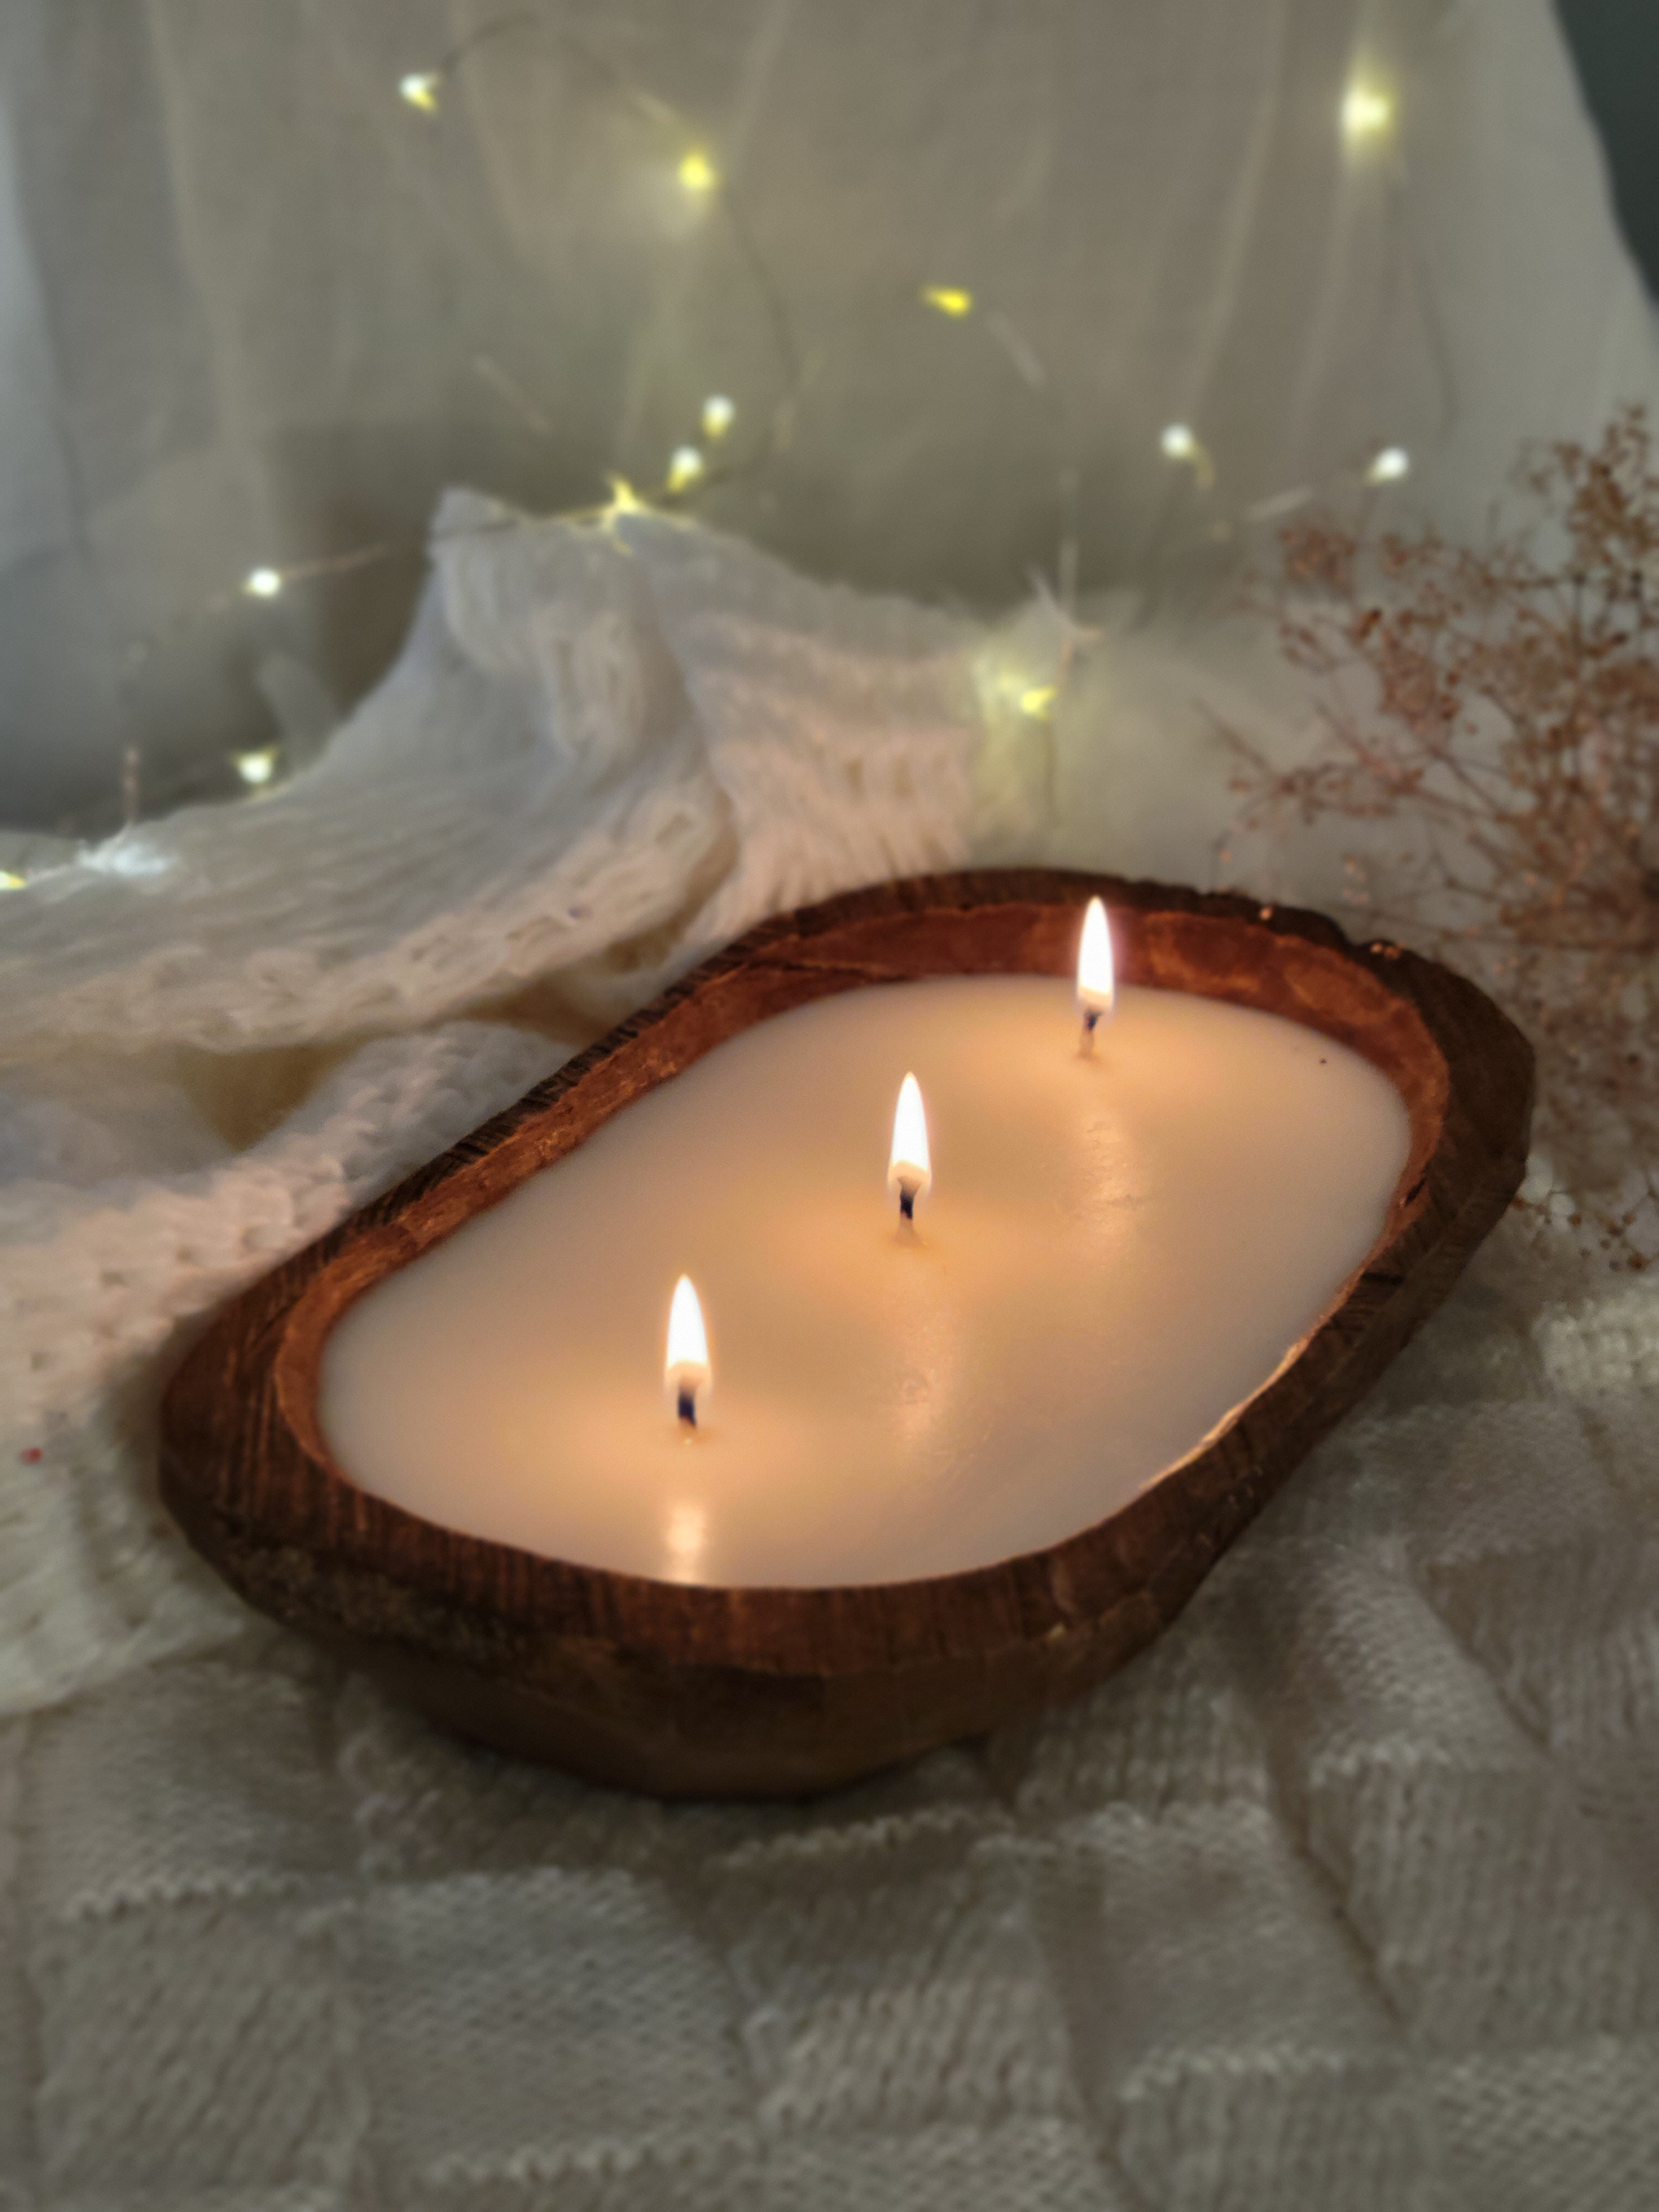 Dough Bowl Candles - 3 Wick | 3-Wick Candle Bowls Create